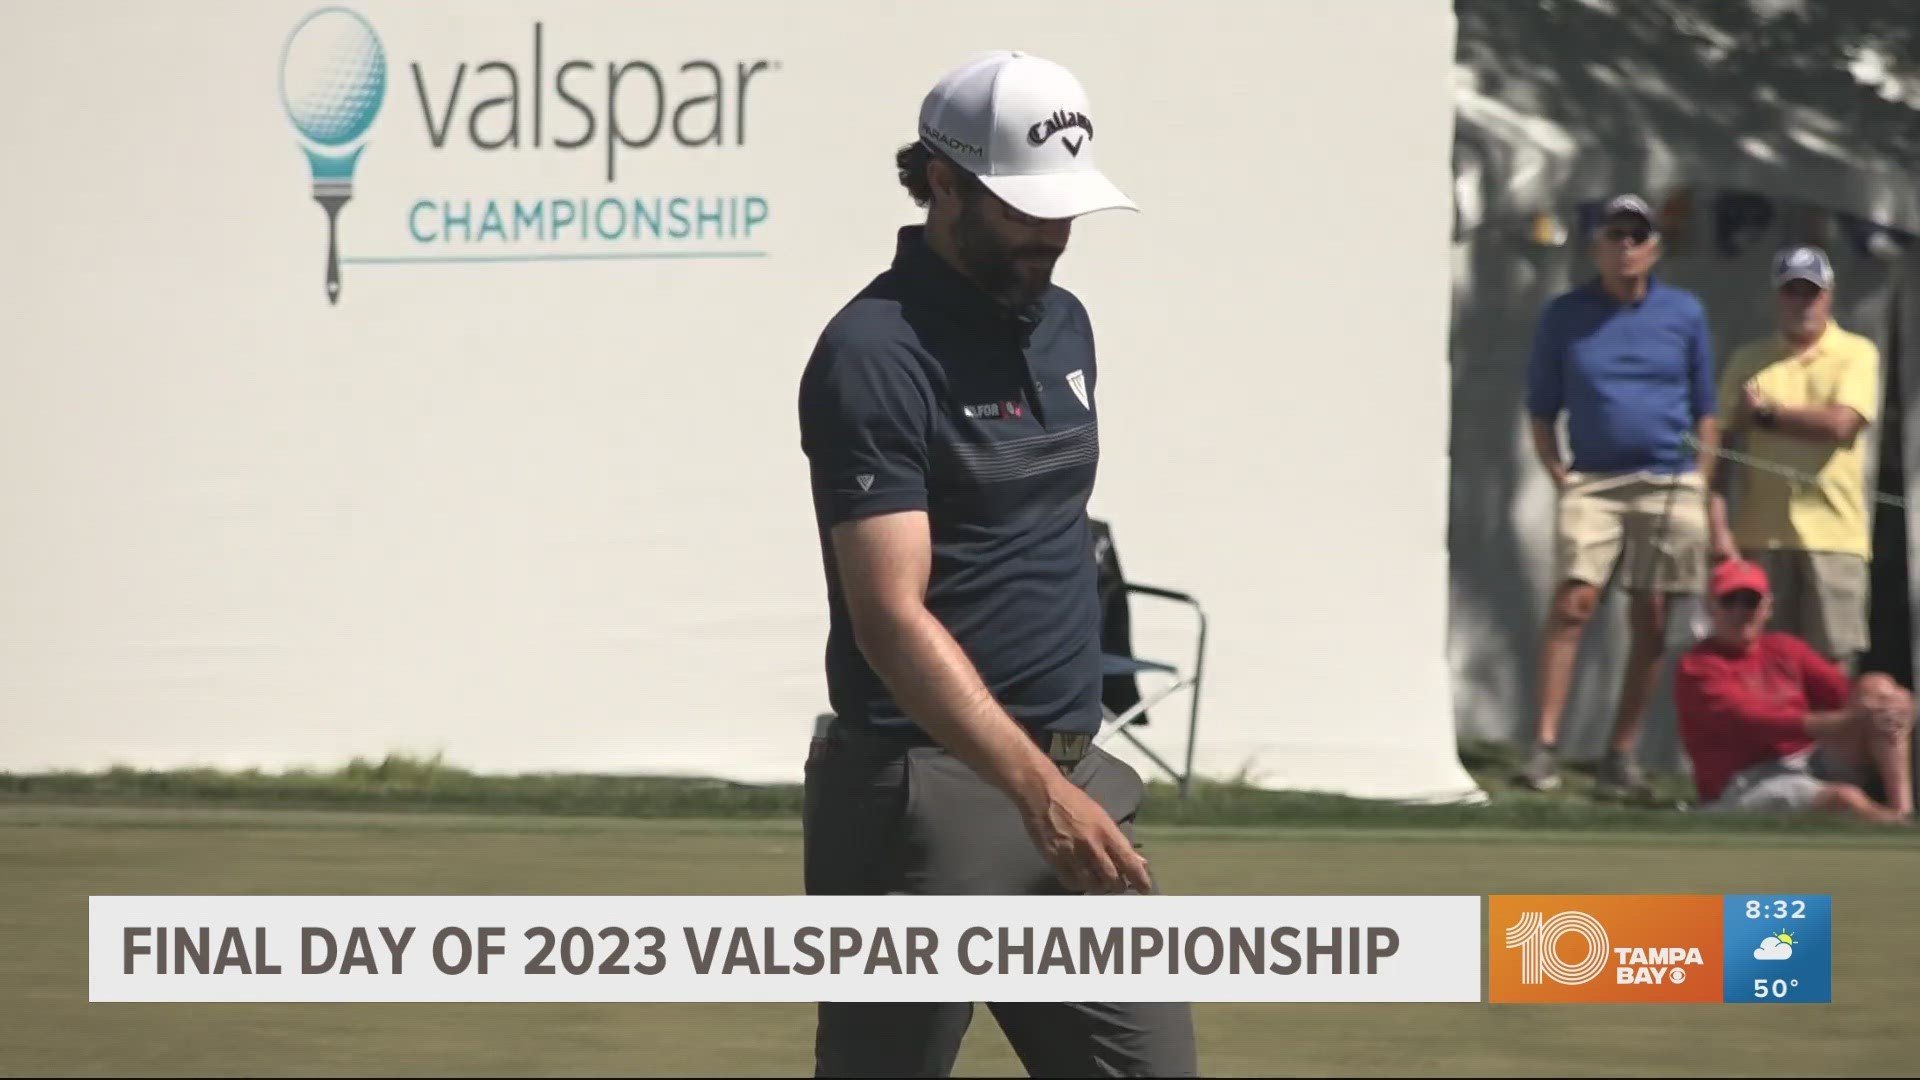 The first round of the Valspar Championship begins at 2 p.m. Thursday, March 16 and concludes at 1 p.m. Sunday, March 19. It will be held at the Innisbrook Resort